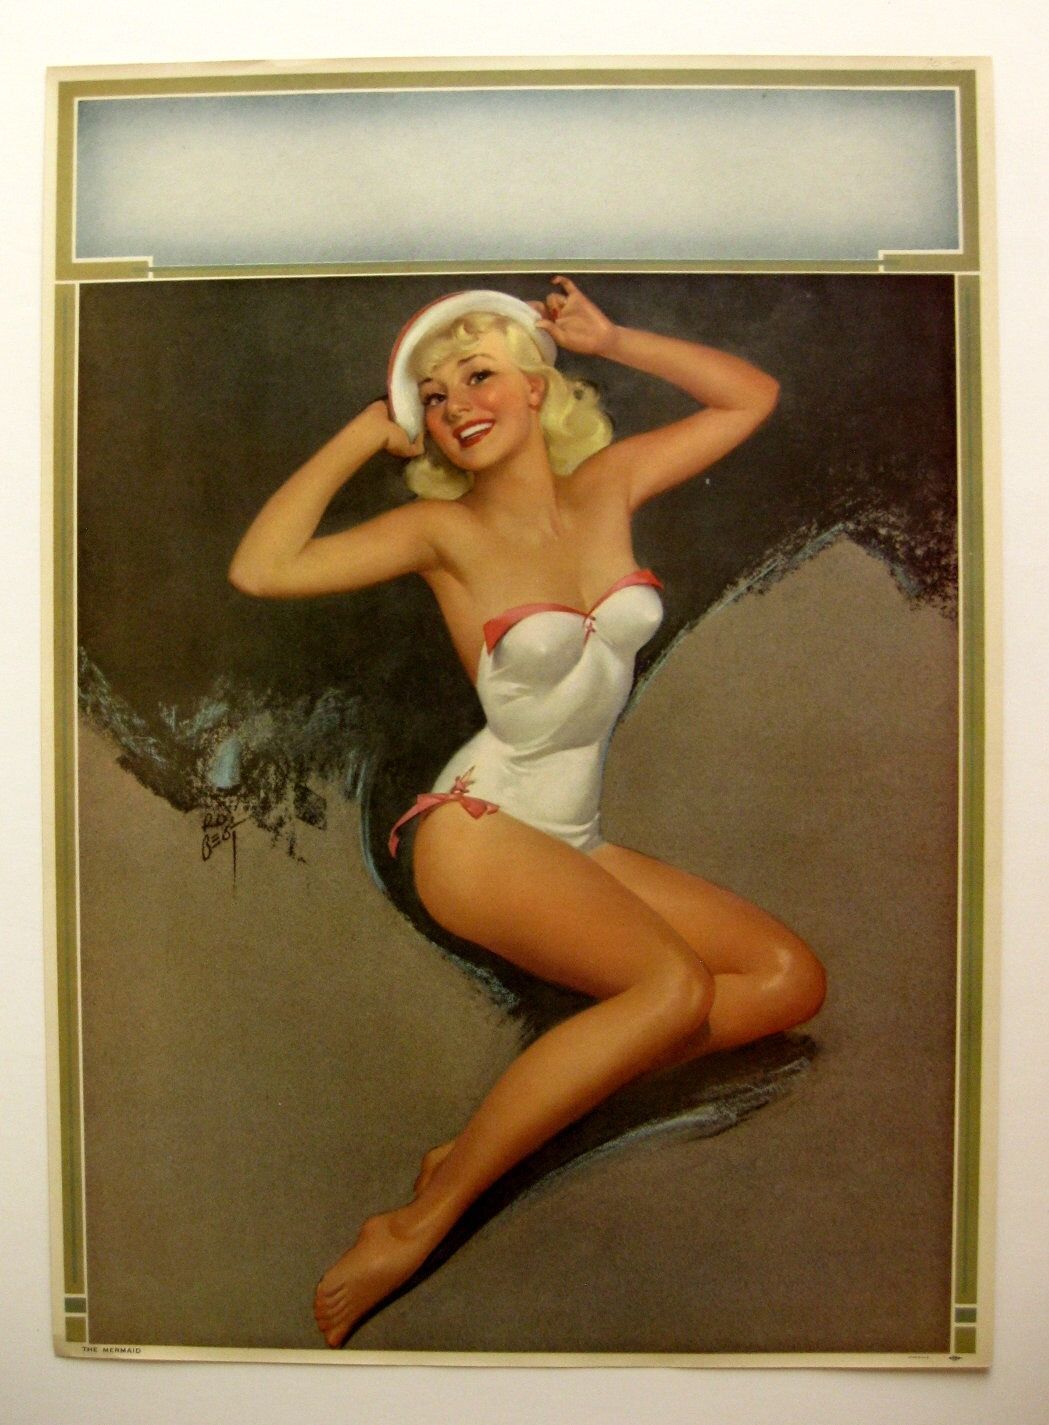 Vintage 1950s Blond Pinup Girl Picture by Roy Best The Mermaid